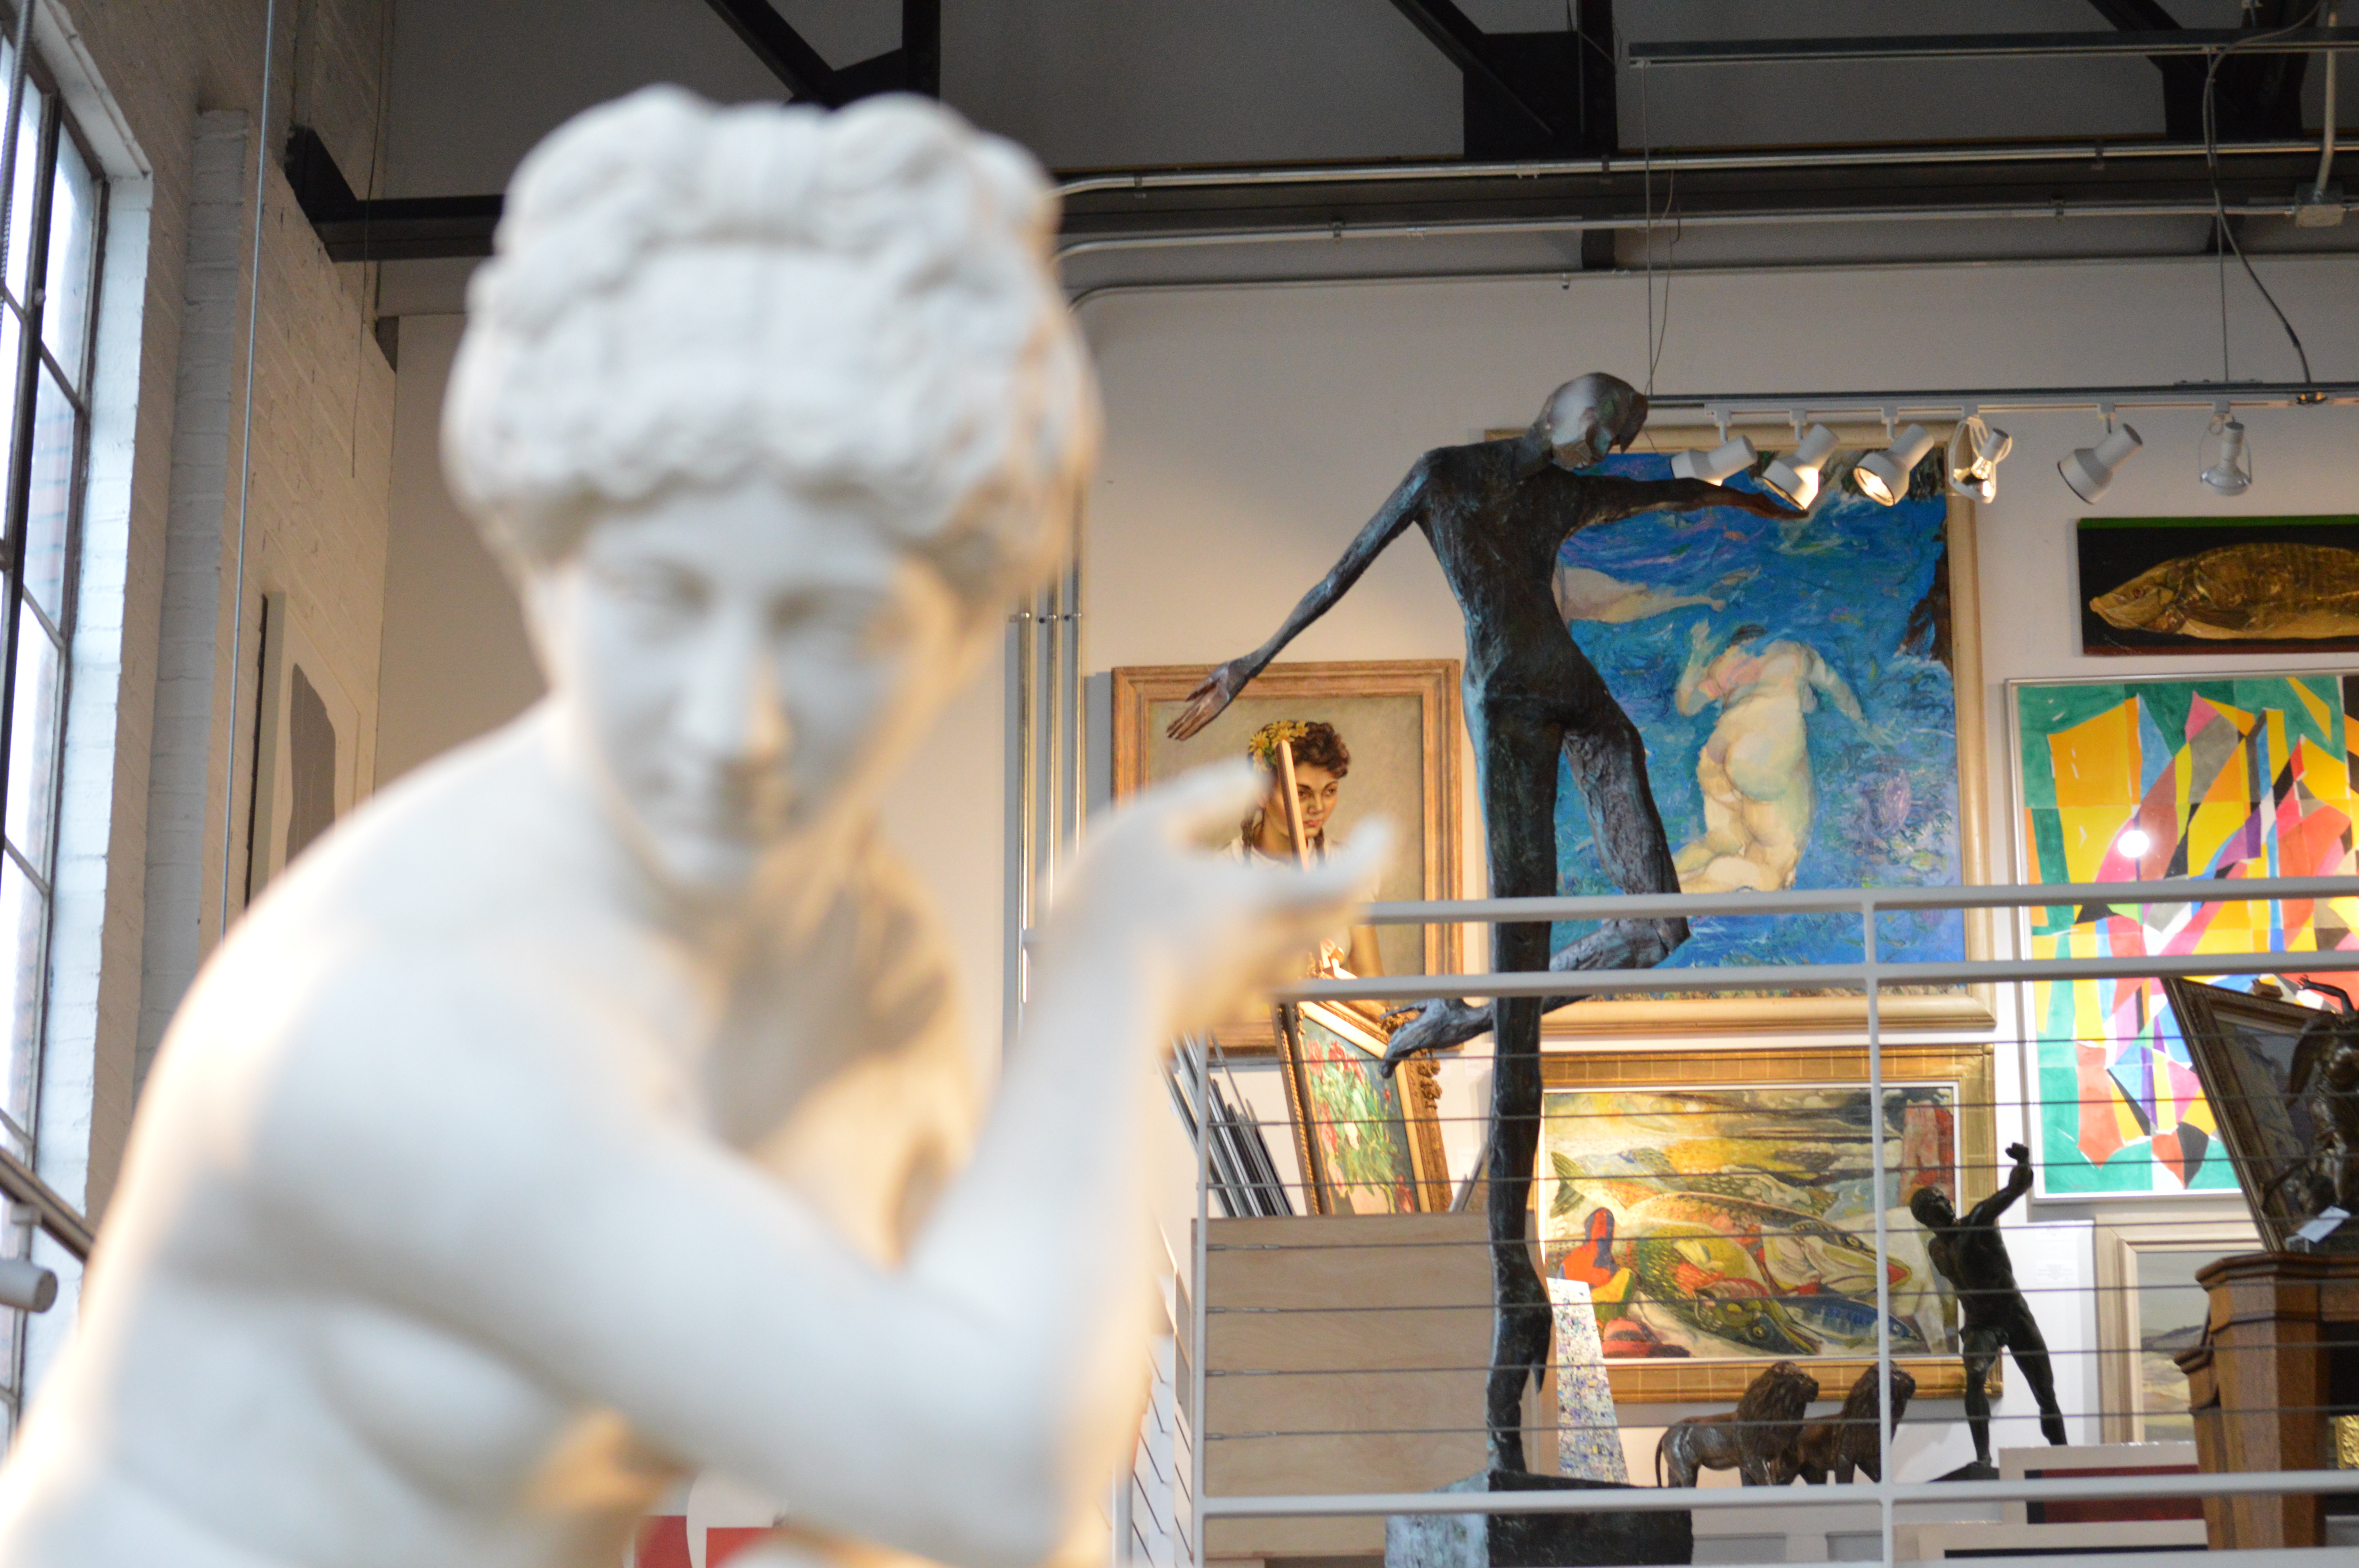 A look at some of the artwork inside WOLFS Gallery. Photo by Jonah L. Rosenblum.